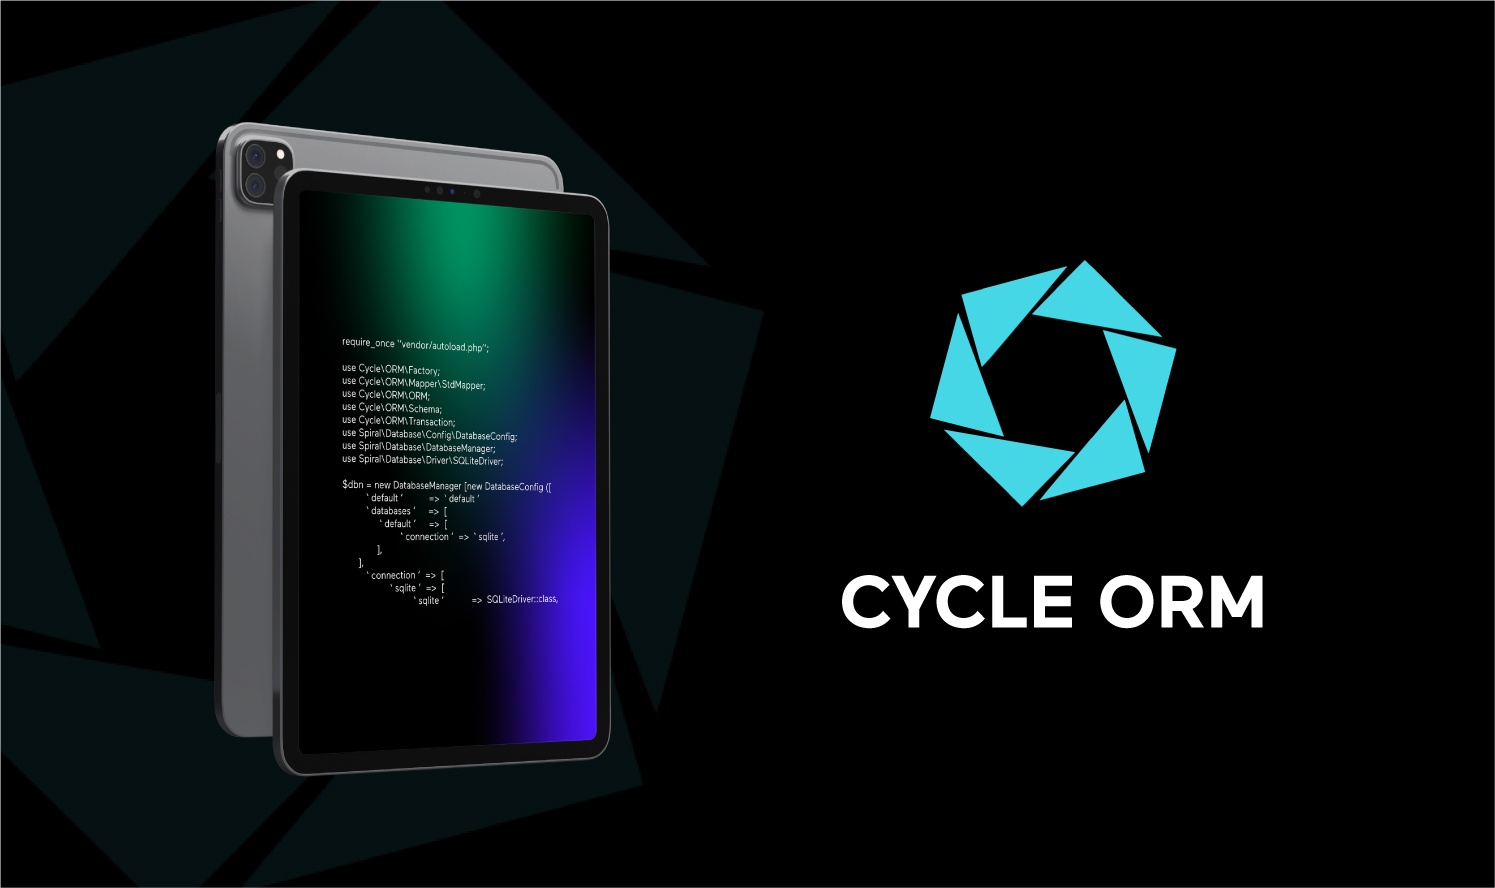 Cycle ORM